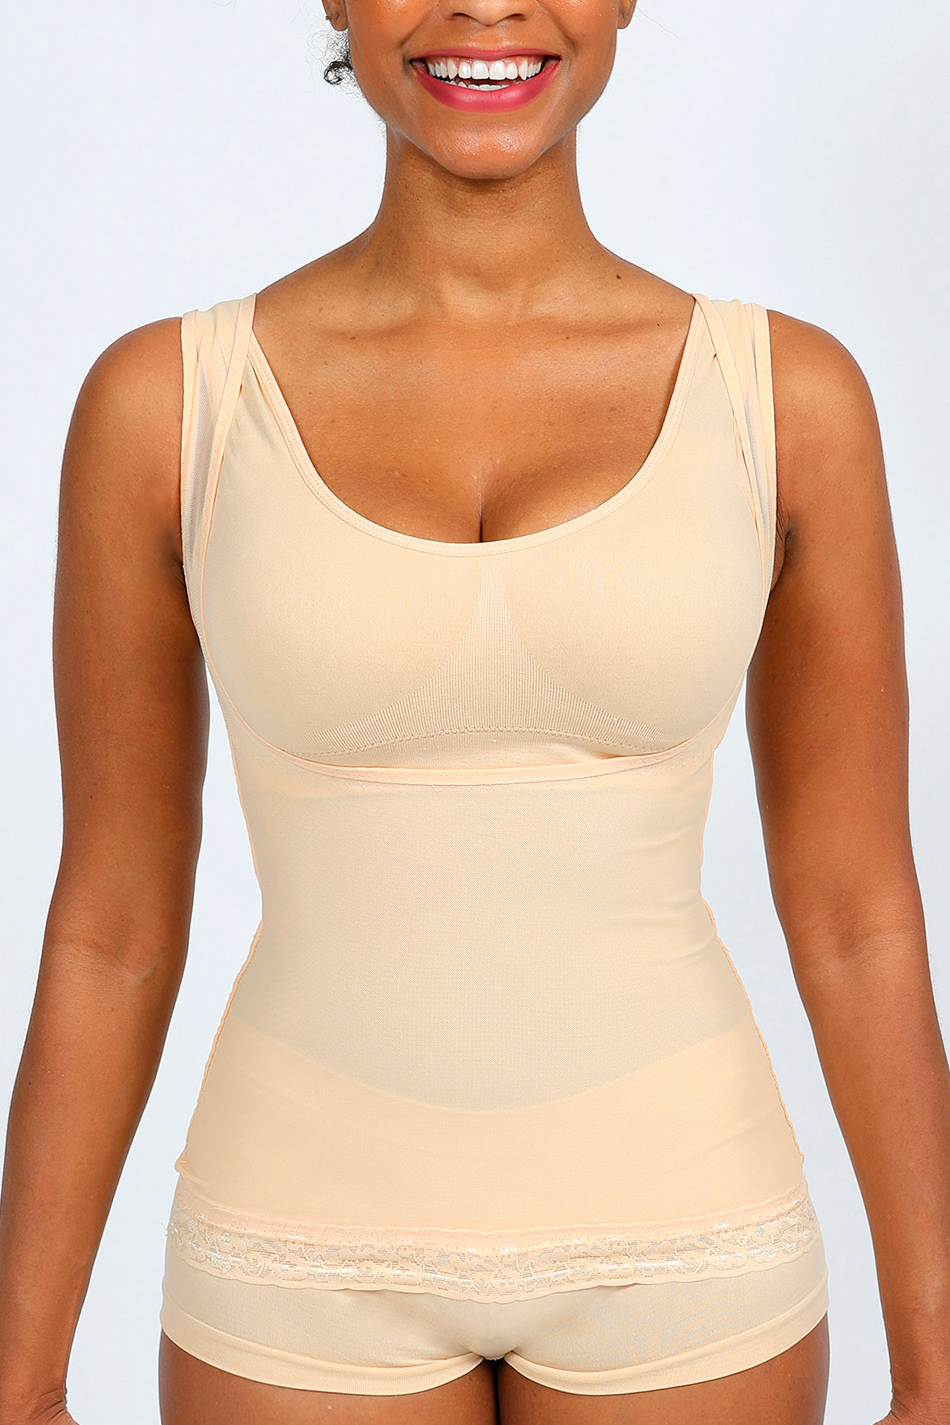 Ardyss Abdo Woman reshaper Perfect for Back Support